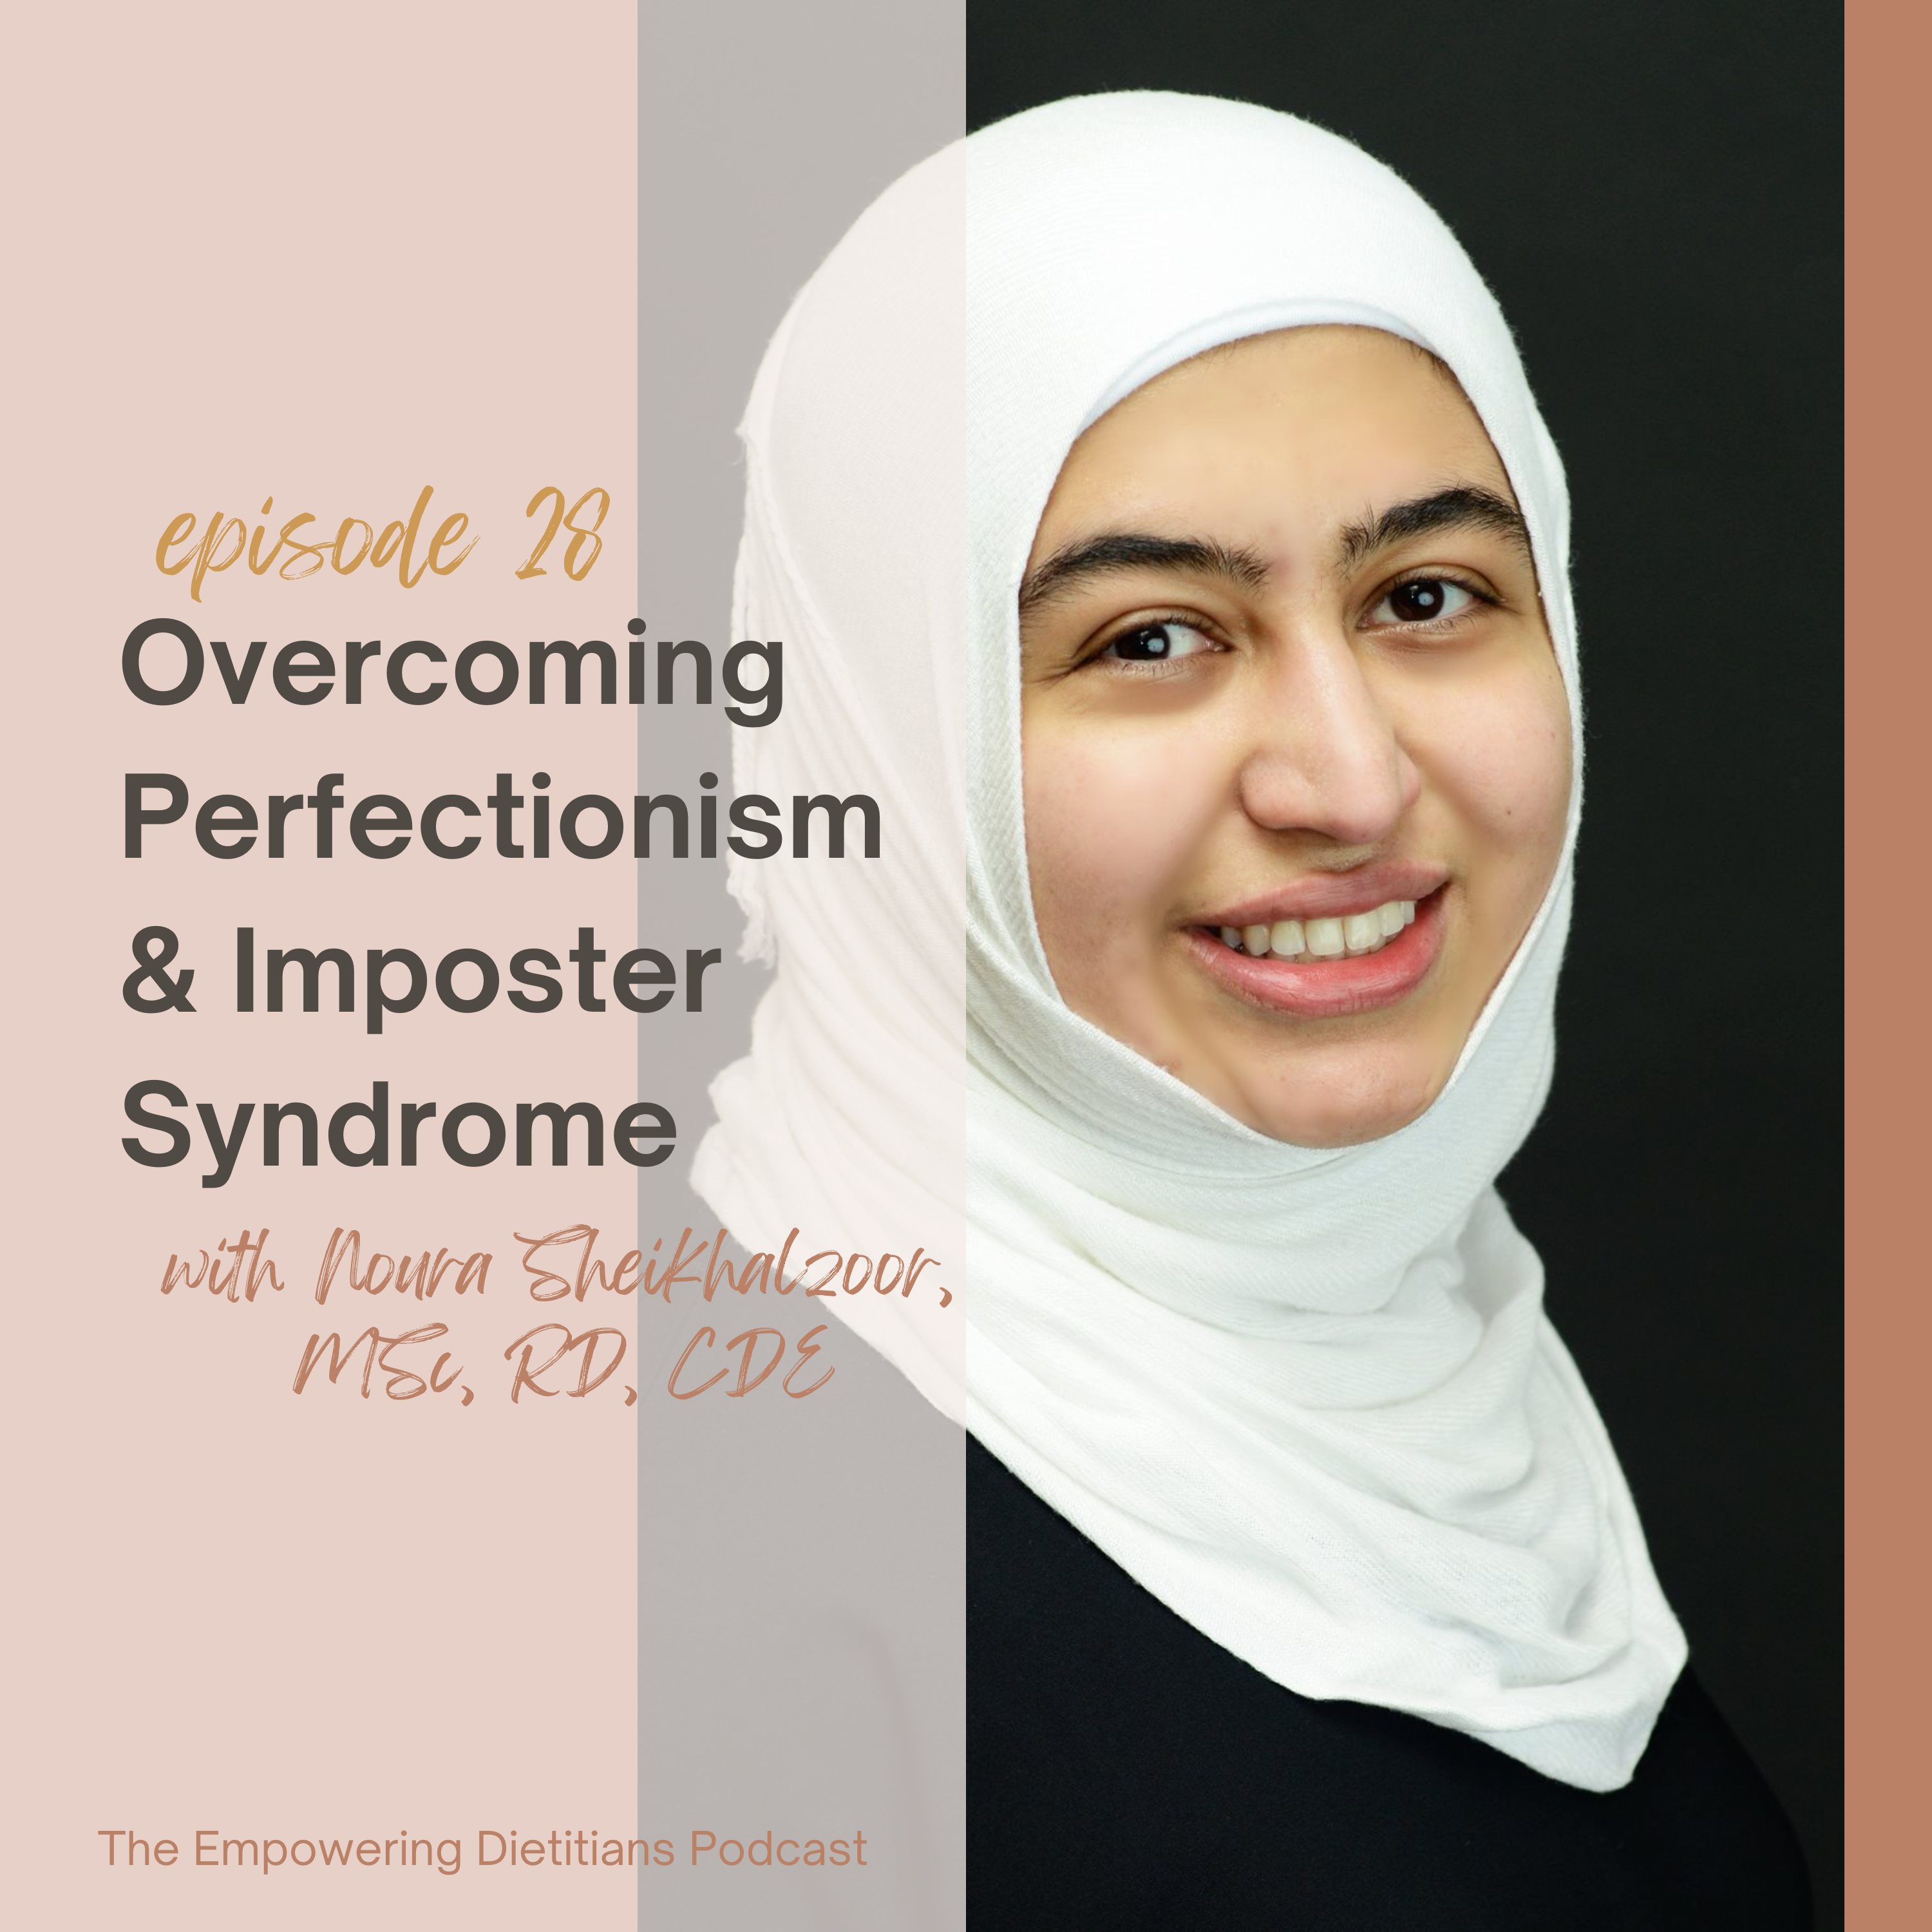 overcoming perfectionism & imposter syndrome with noura sheikhalzoor